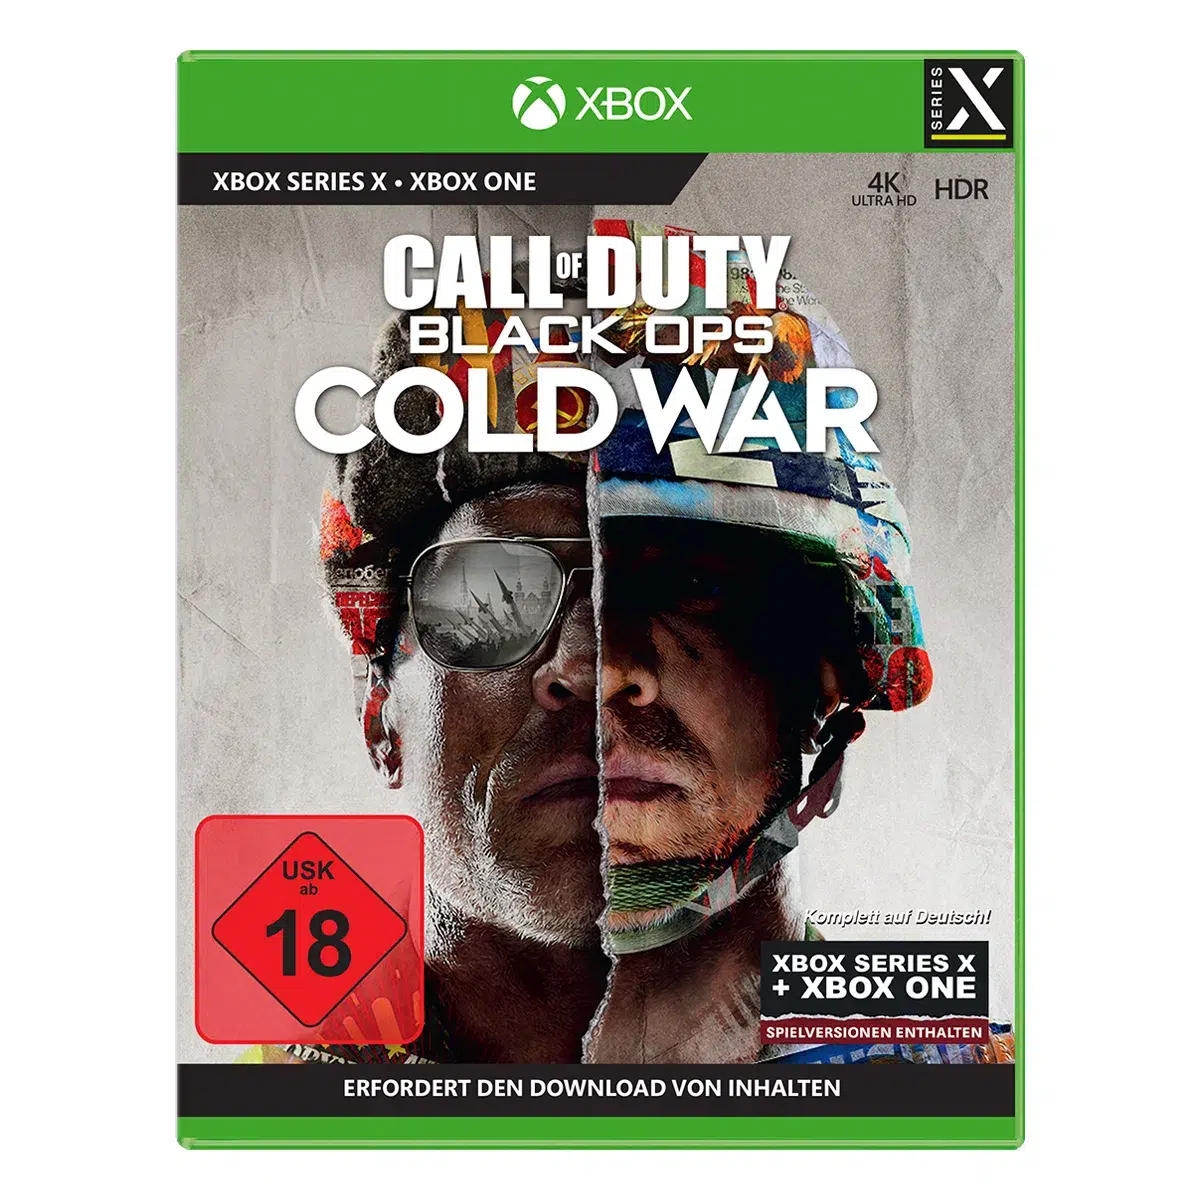 Call of Duty: Black Ops - Cold War - XSRX